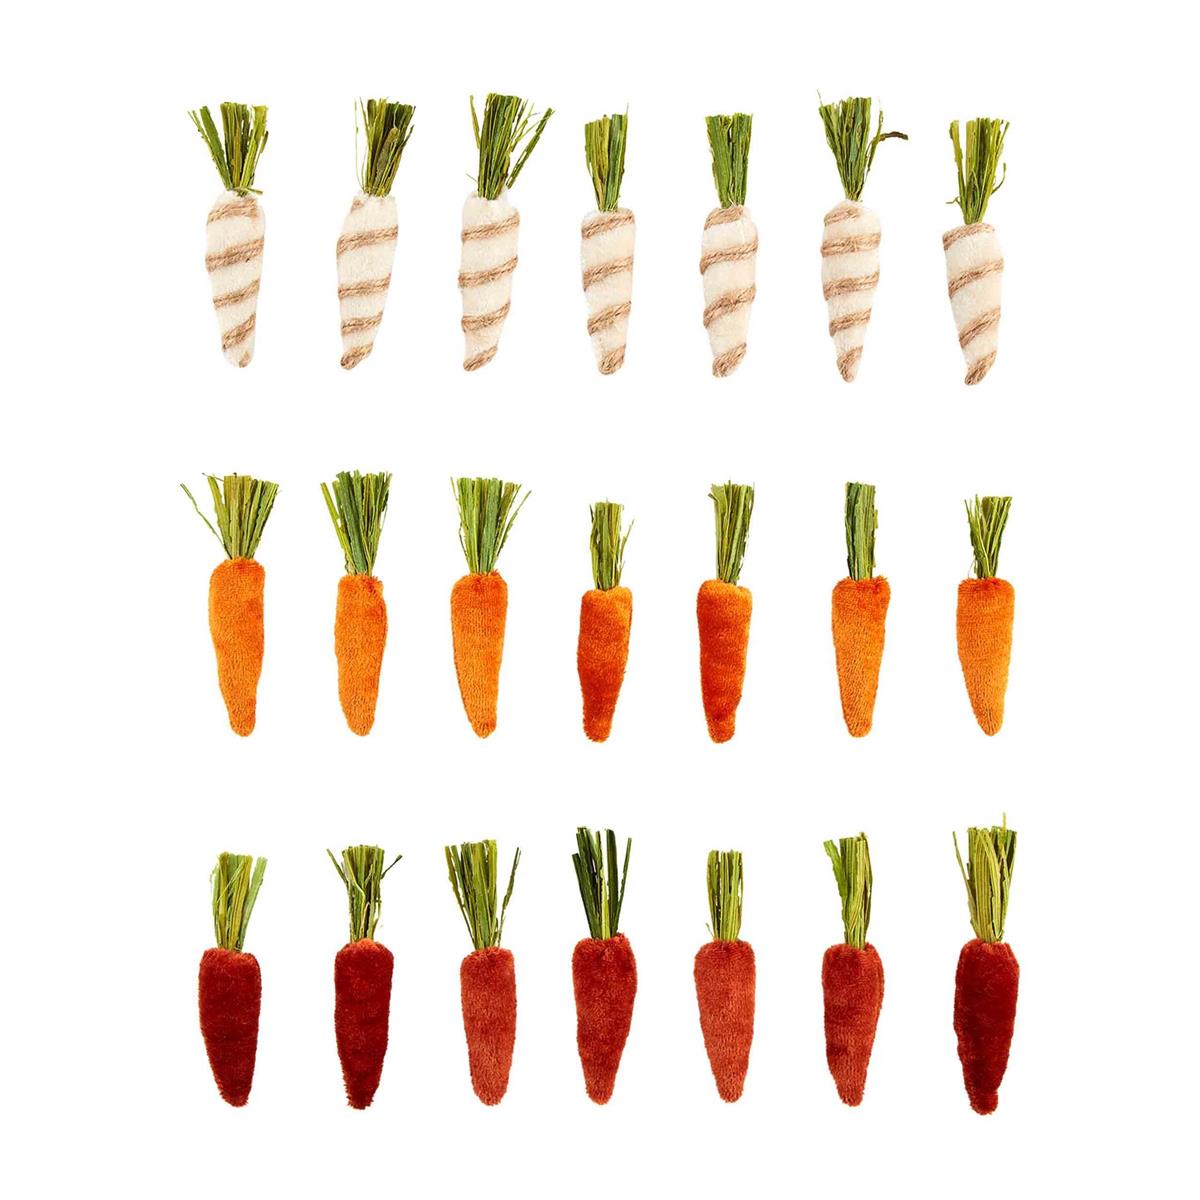 all three colors and patterns of mini carrots spread out and displayed on a white background